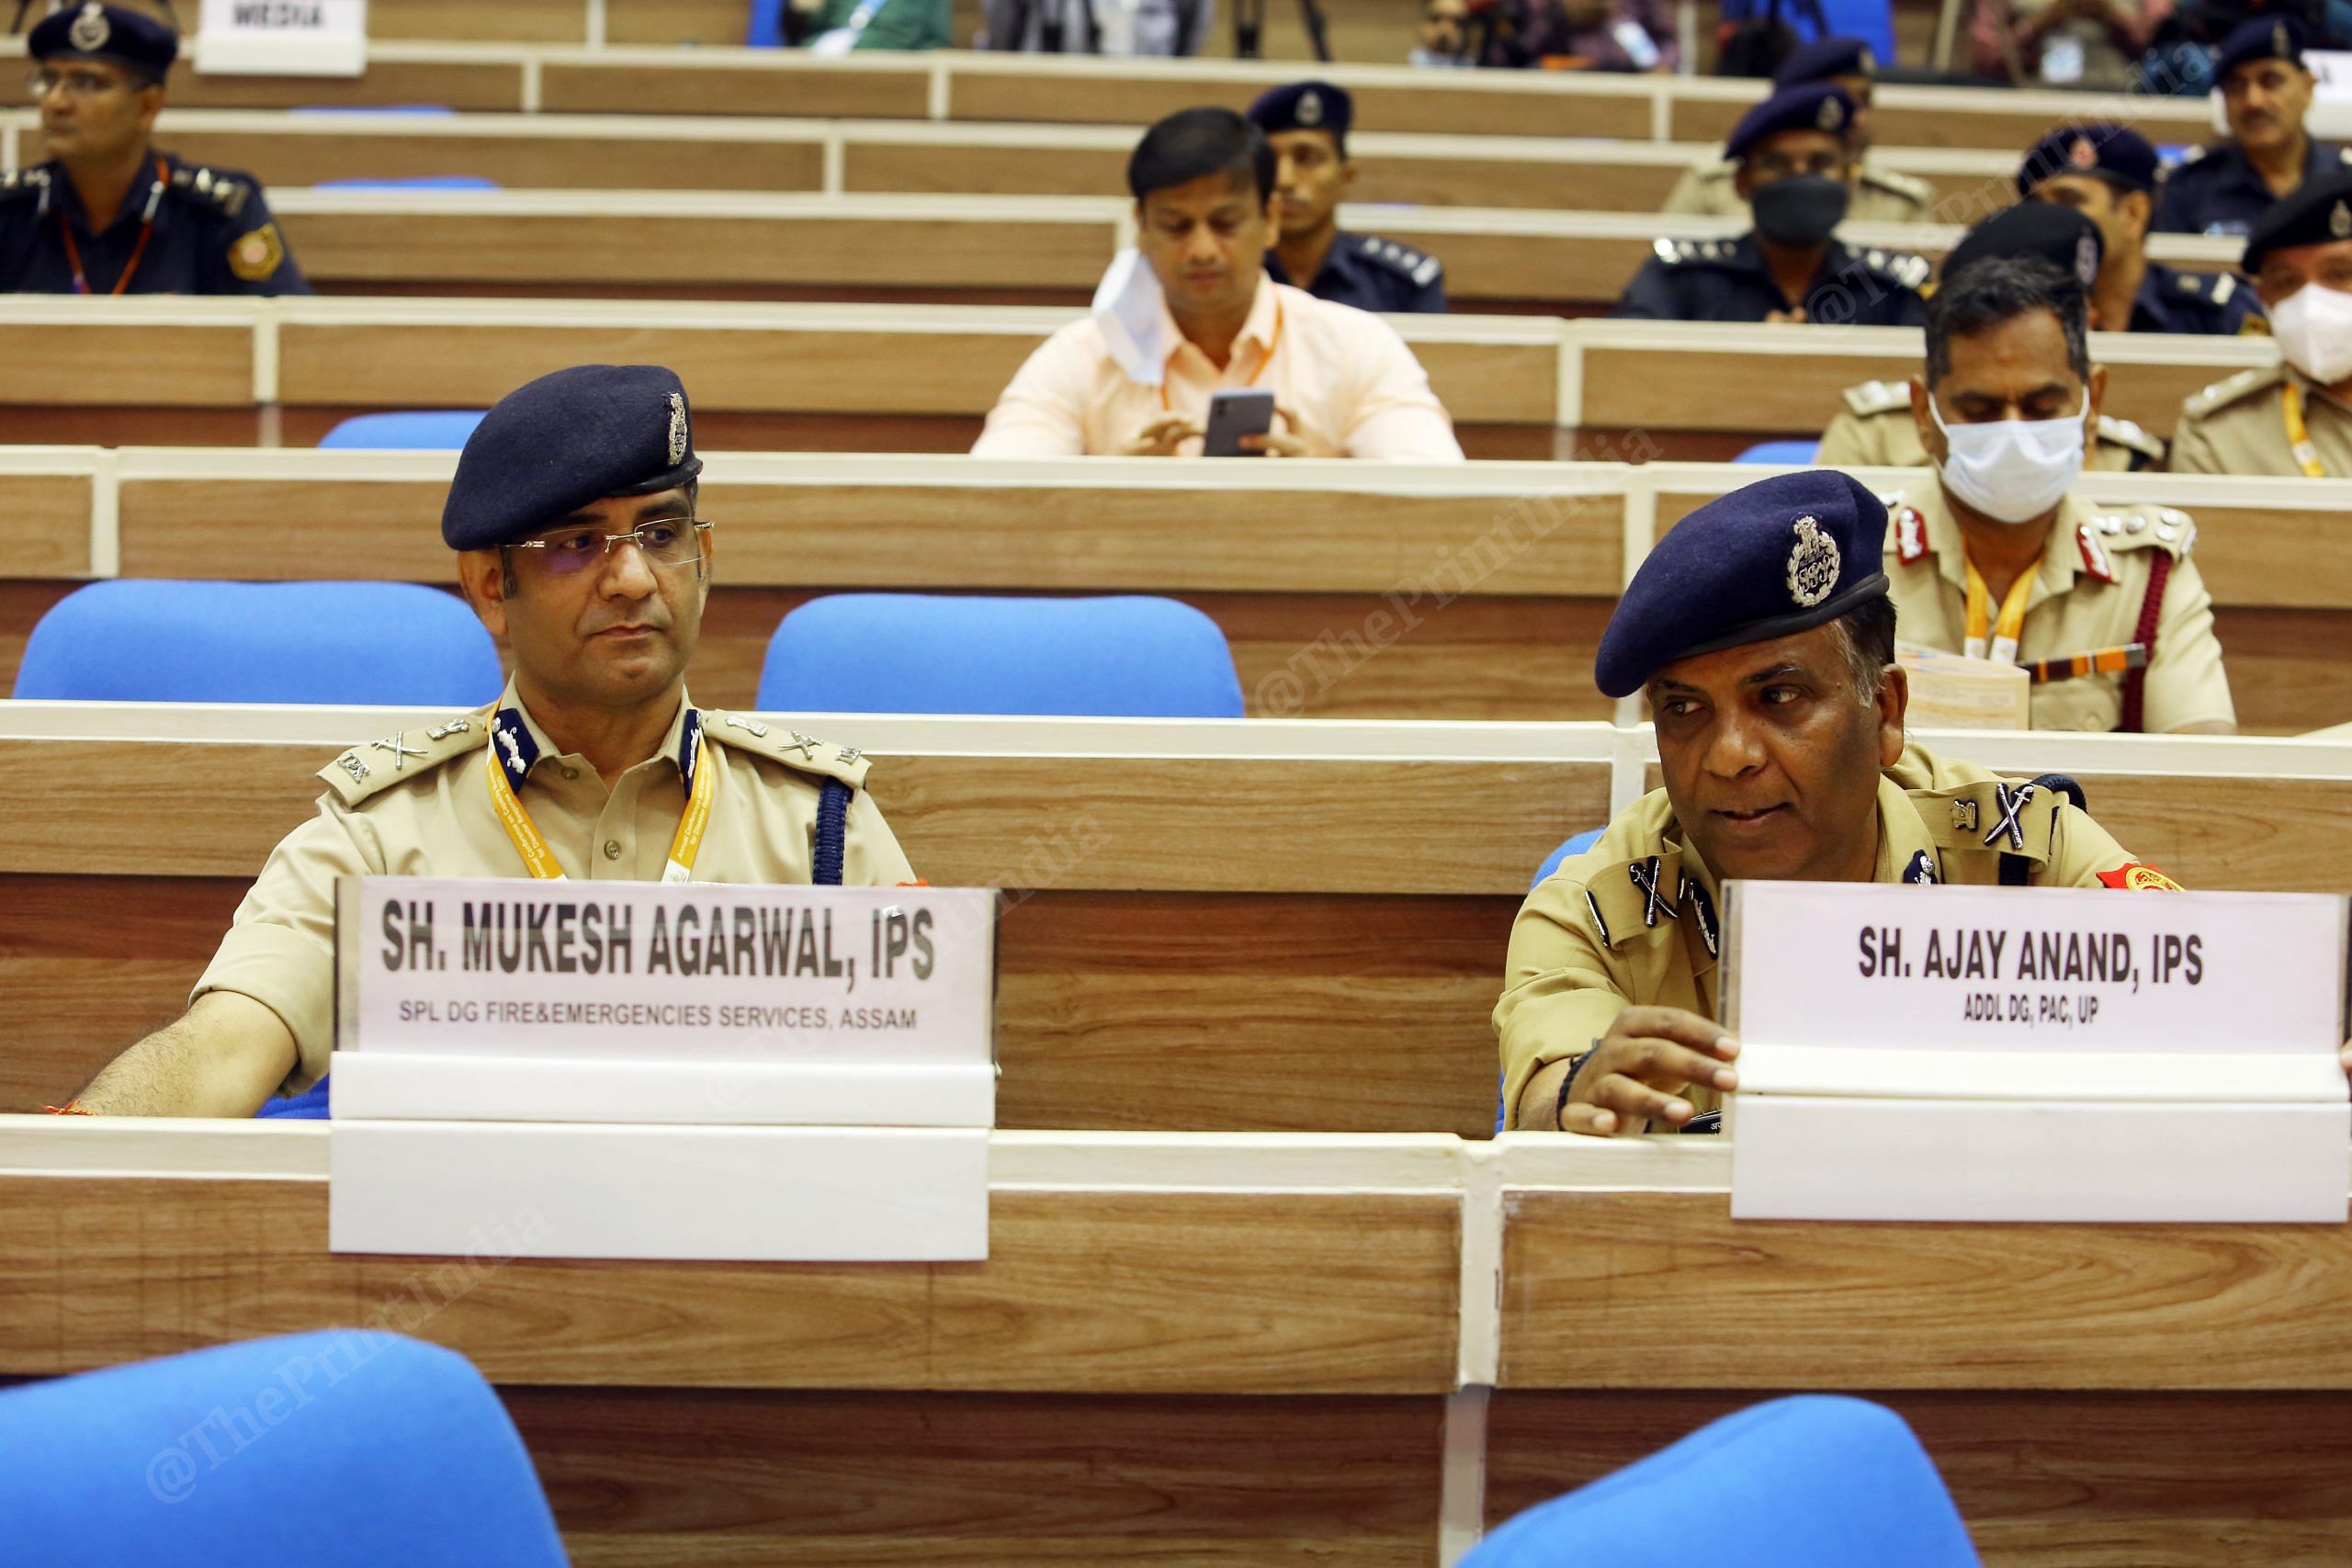 SPL DG Fire & Emergencies Service, Assam Mukesh Aggarwal and ADDL DG PAC, UP Ajay Anand during Annual Conference on Capacity Building for Disaster Response- 2022 at Vigyan Bhawan | Praveen Jain | ThePrint